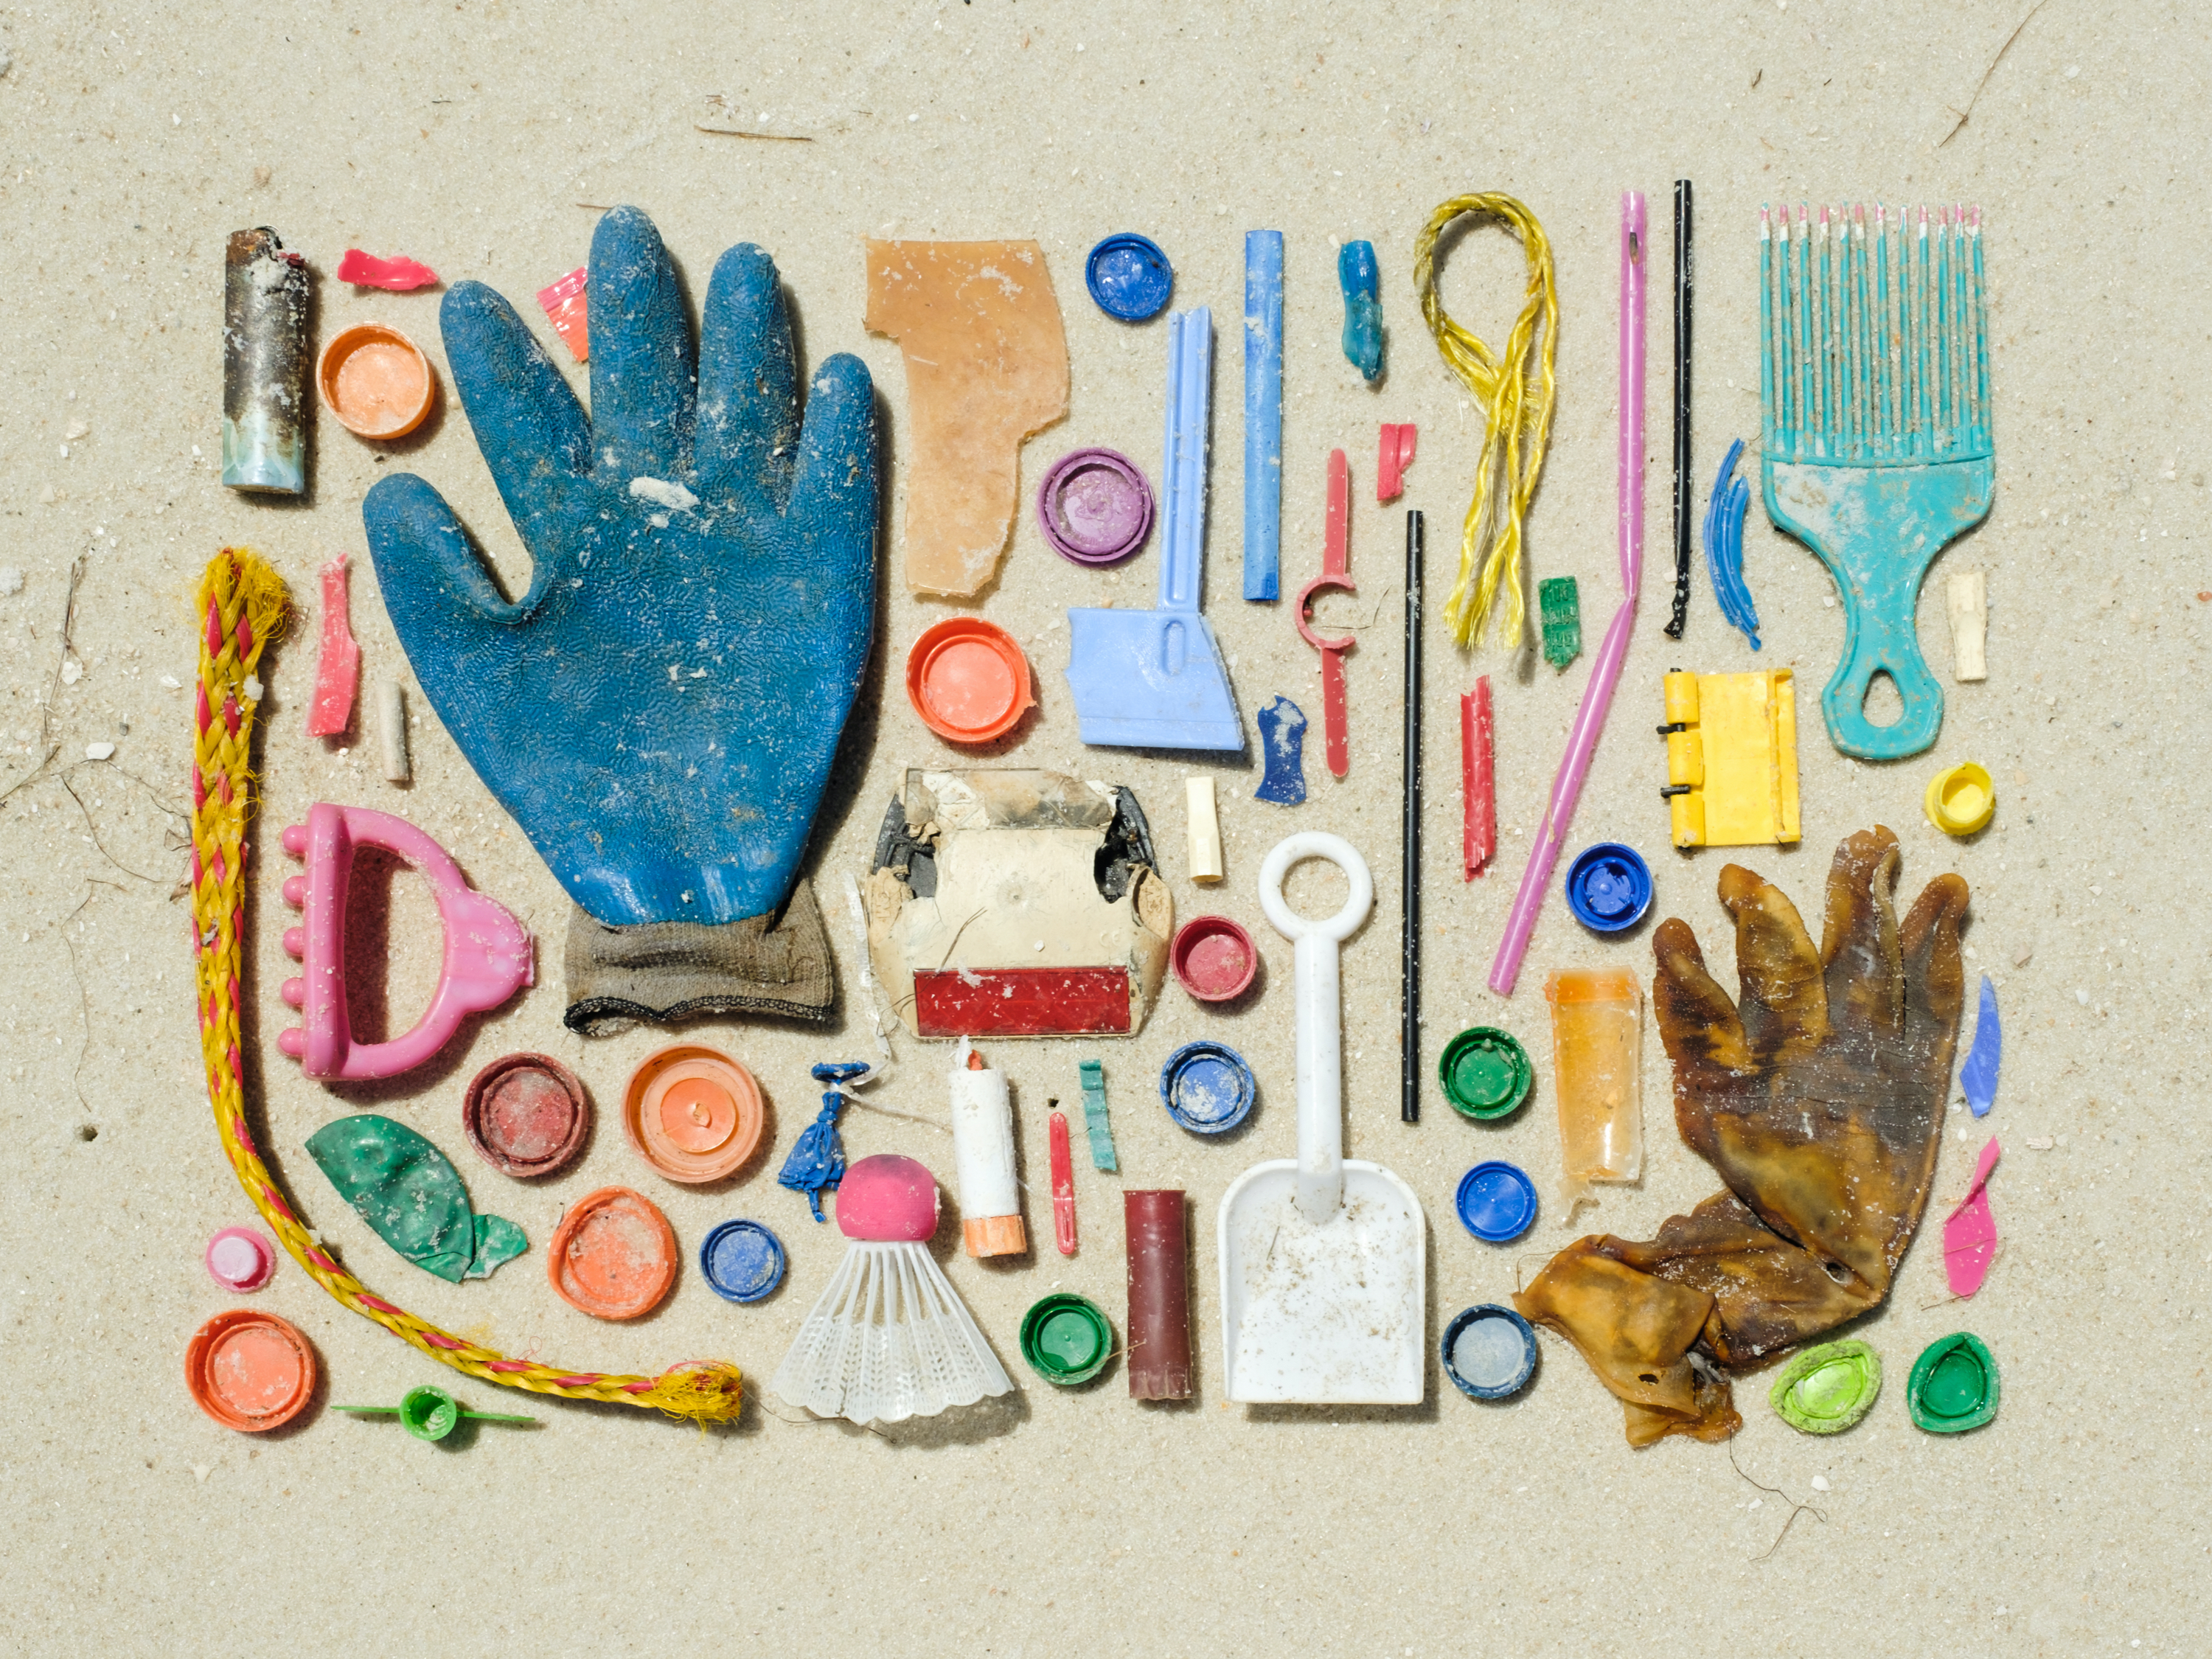 Organized pile of collected plastic on a sandy beach.